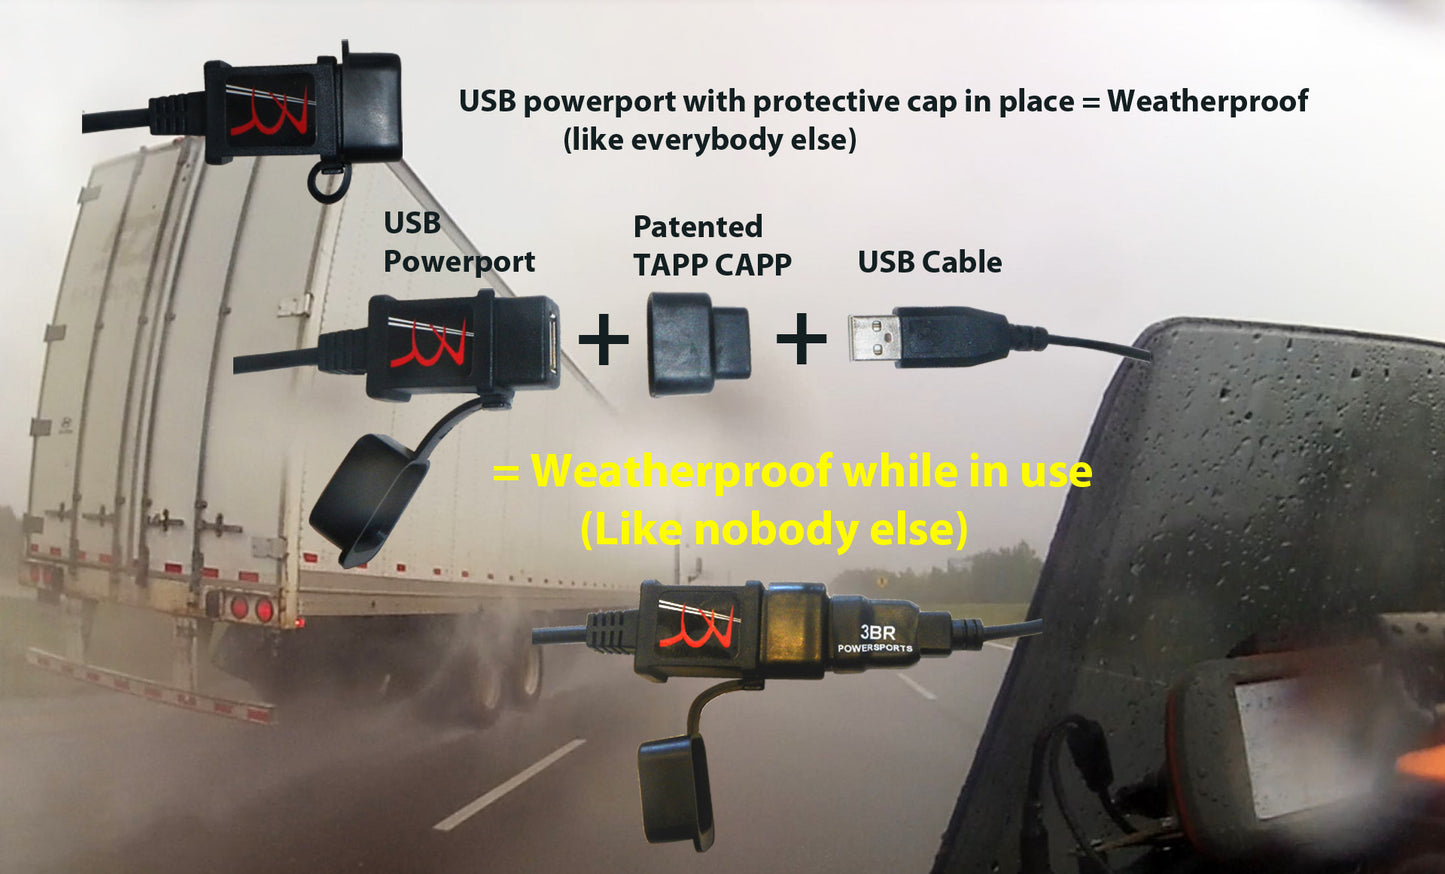 TAPP All-weather USB power port with Universal Mount and TAPP CAPP